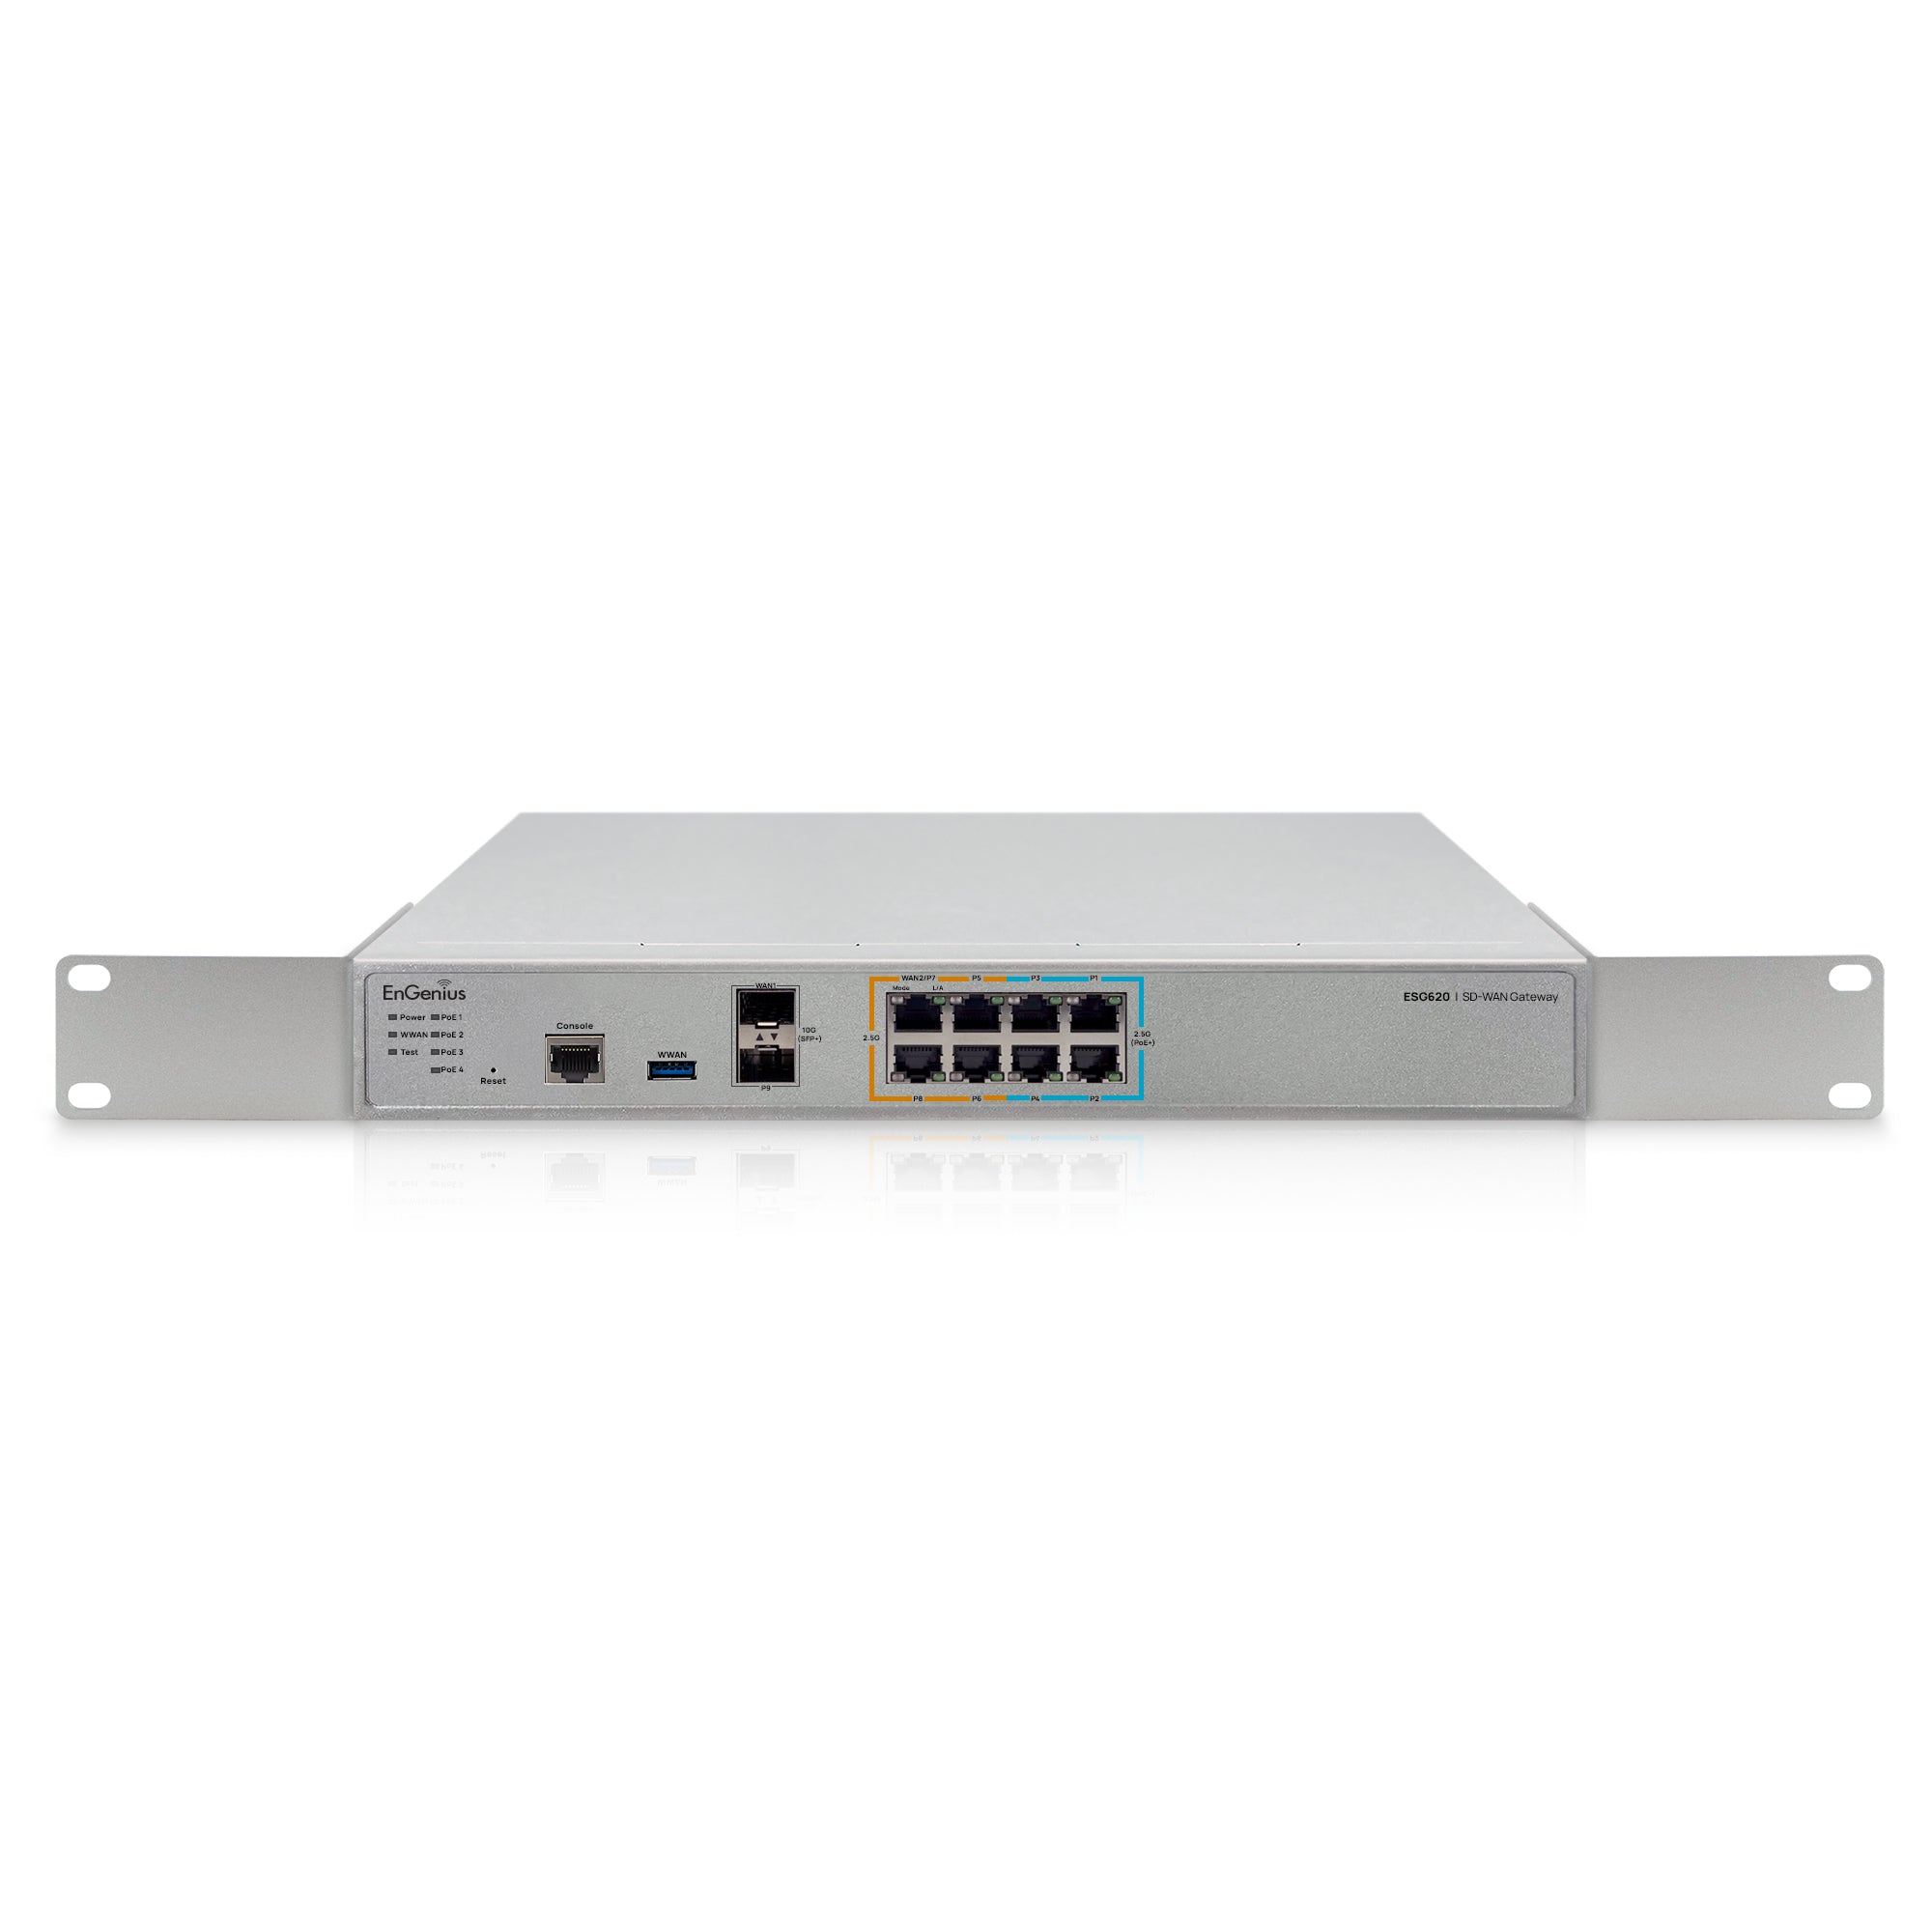 ESG620: Cloud Managed SD-WAN Security Gateway with Quad Core 2.2GHz and 8x 2.5G ports